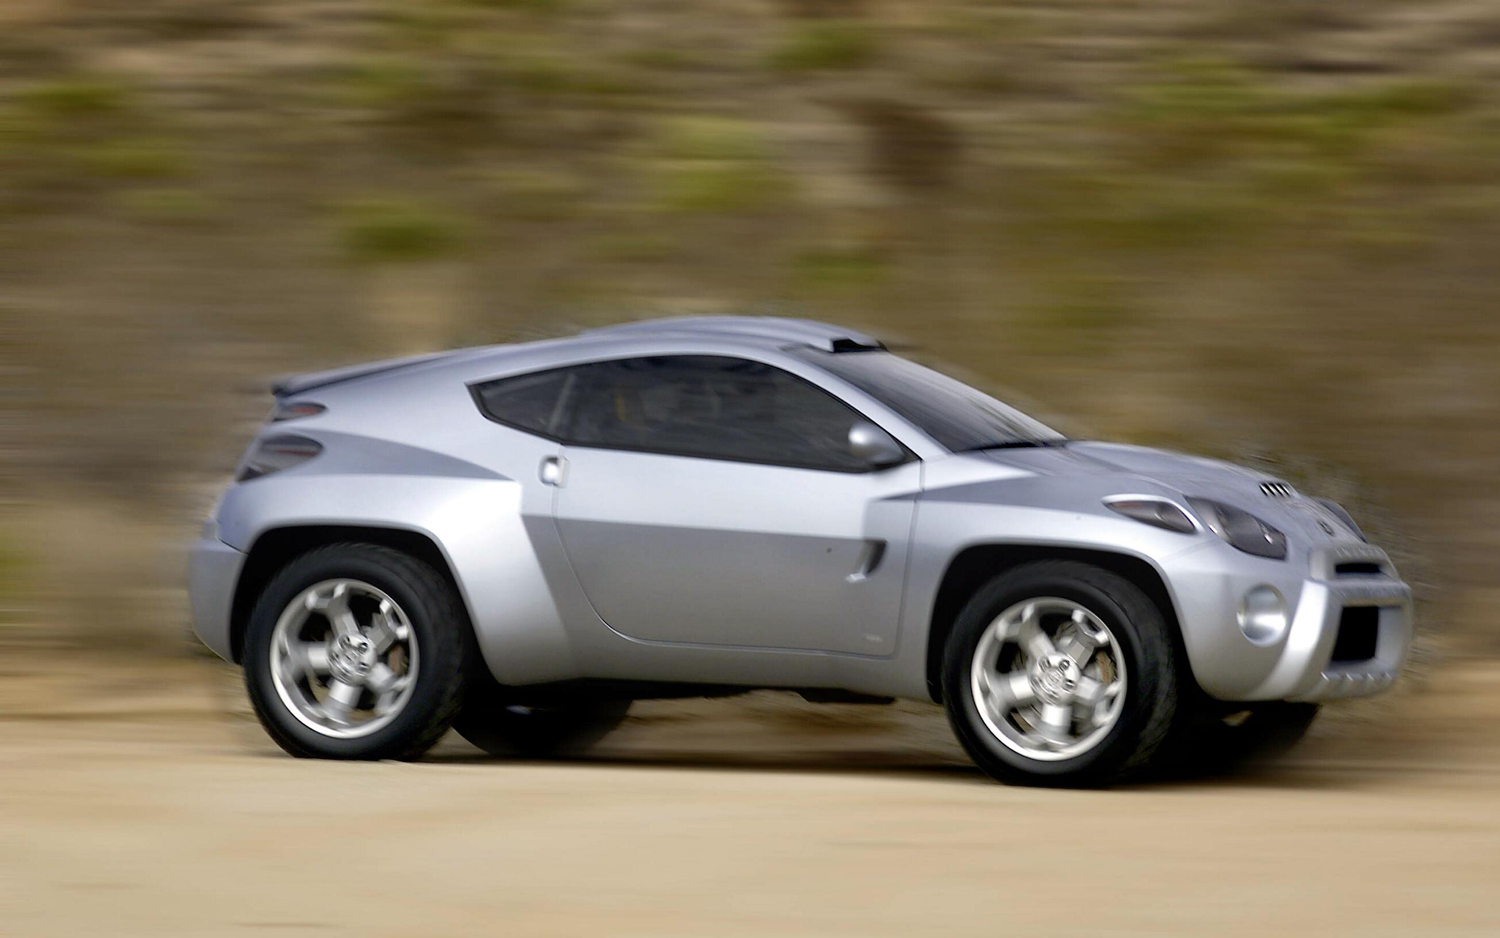 toyota-rsc-rugged-sport-coupe-side-view.jpg